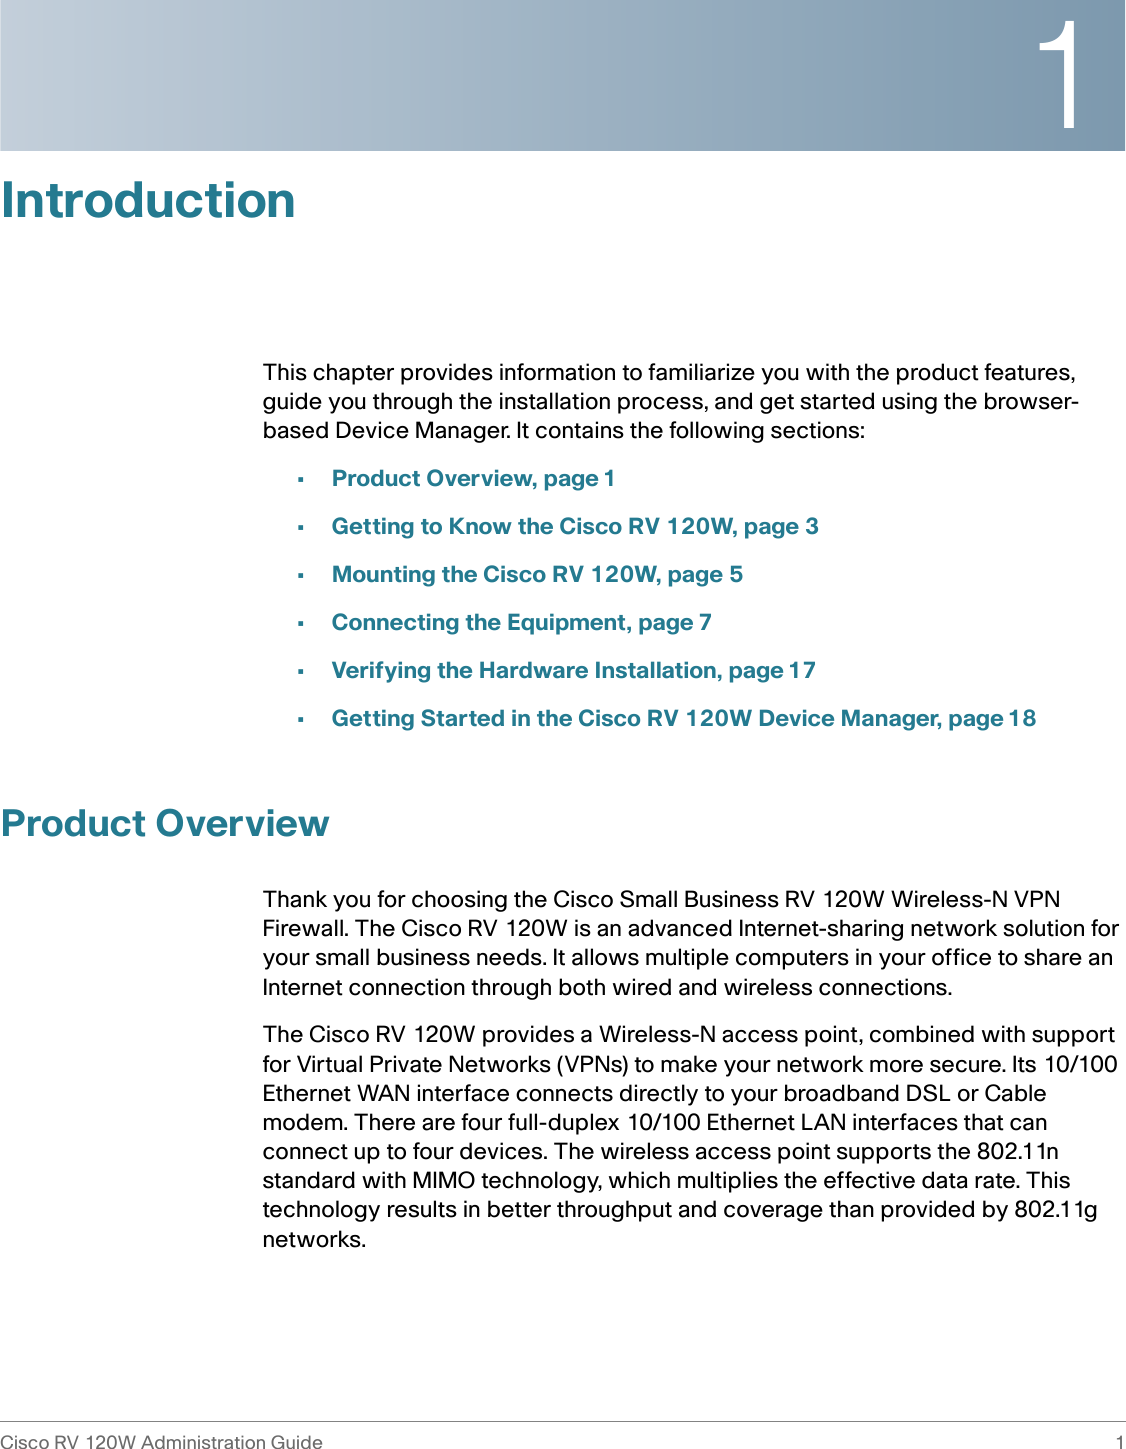 1Cisco RV 120W Administration Guide 1 IntroductionThis chapter provides information to familiarize you with the product features, guide you through the installation process, and get started using the browser-based Device Manager. It contains the following sections:•Product Overview, page 1•Getting to Know the Cisco RV 120W, page 3•Mounting the Cisco RV 120W, page 5•Connecting the Equipment, page 7•Verifying the Hardware Installation, page 17•Getting Started in the Cisco RV 120W Device Manager, page 18Product OverviewThank you for choosing the Cisco Small Business RV 120W Wireless-N VPN Firewall. The Cisco RV 120W is an advanced Internet-sharing network solution for your small business needs. It allows multiple computers in your office to share an Internet connection through both wired and wireless connections.The Cisco RV 120W provides a Wireless-N access point, combined with support for Virtual Private Networks (VPNs) to make your network more secure. Its 10/100 Ethernet WAN interface connects directly to your broadband DSL or Cable modem. There are four full-duplex 10/100 Ethernet LAN interfaces that can connect up to four devices. The wireless access point supports the 802.11n standard with MIMO technology, which multiplies the effective data rate. This technology results in better throughput and coverage than provided by 802.11g networks. 